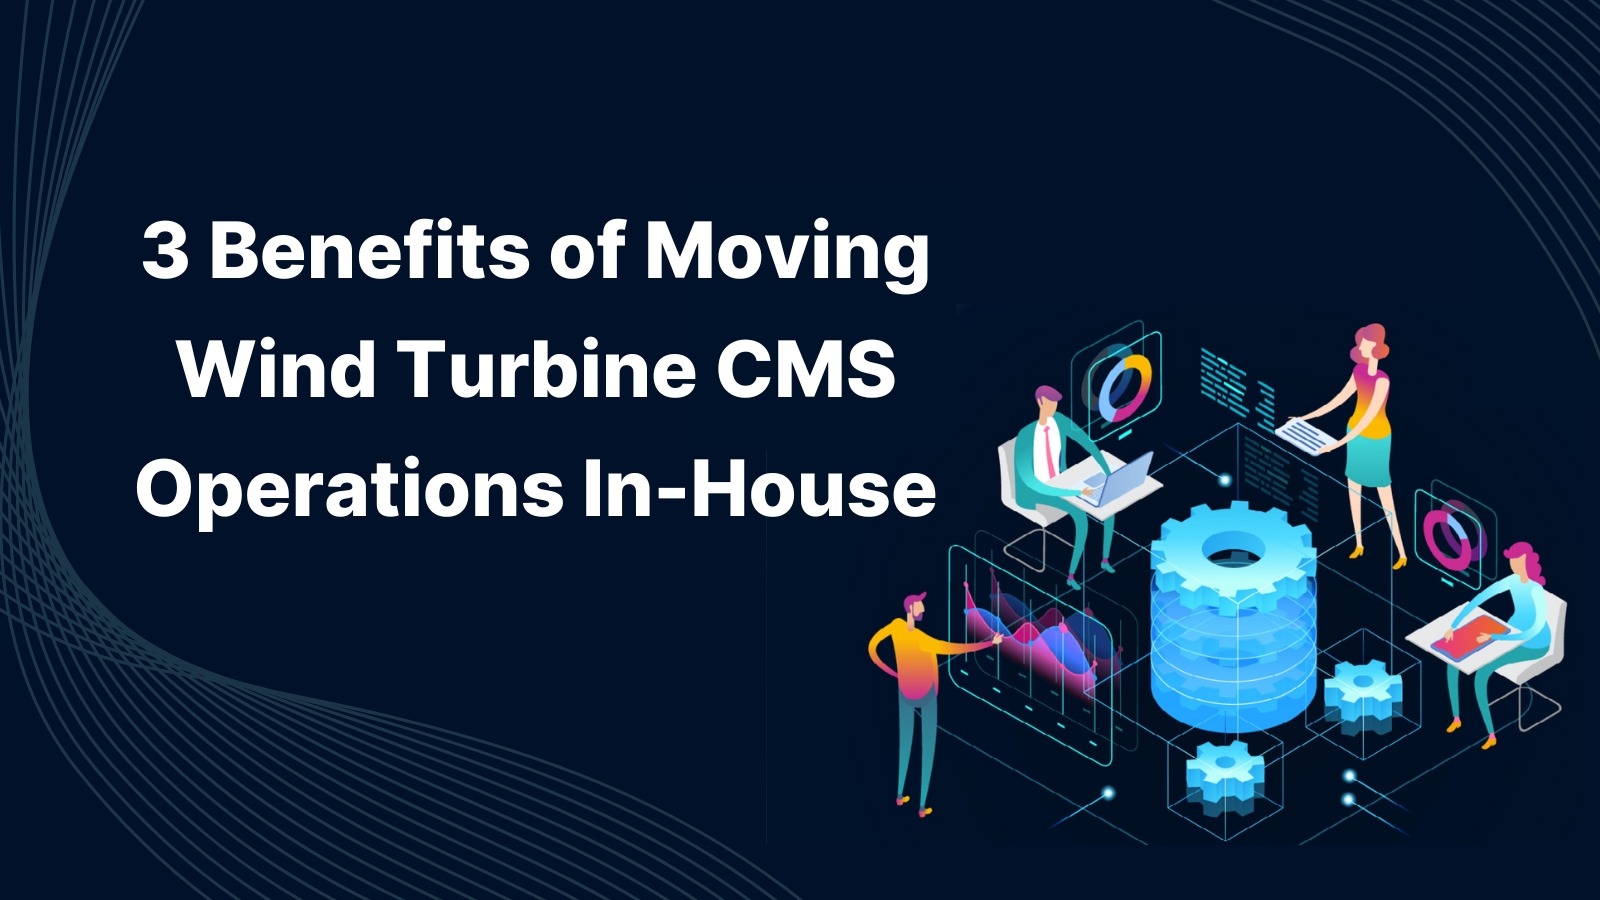 3 Benefits of Moving Wind Turbine CMS Operations In-House